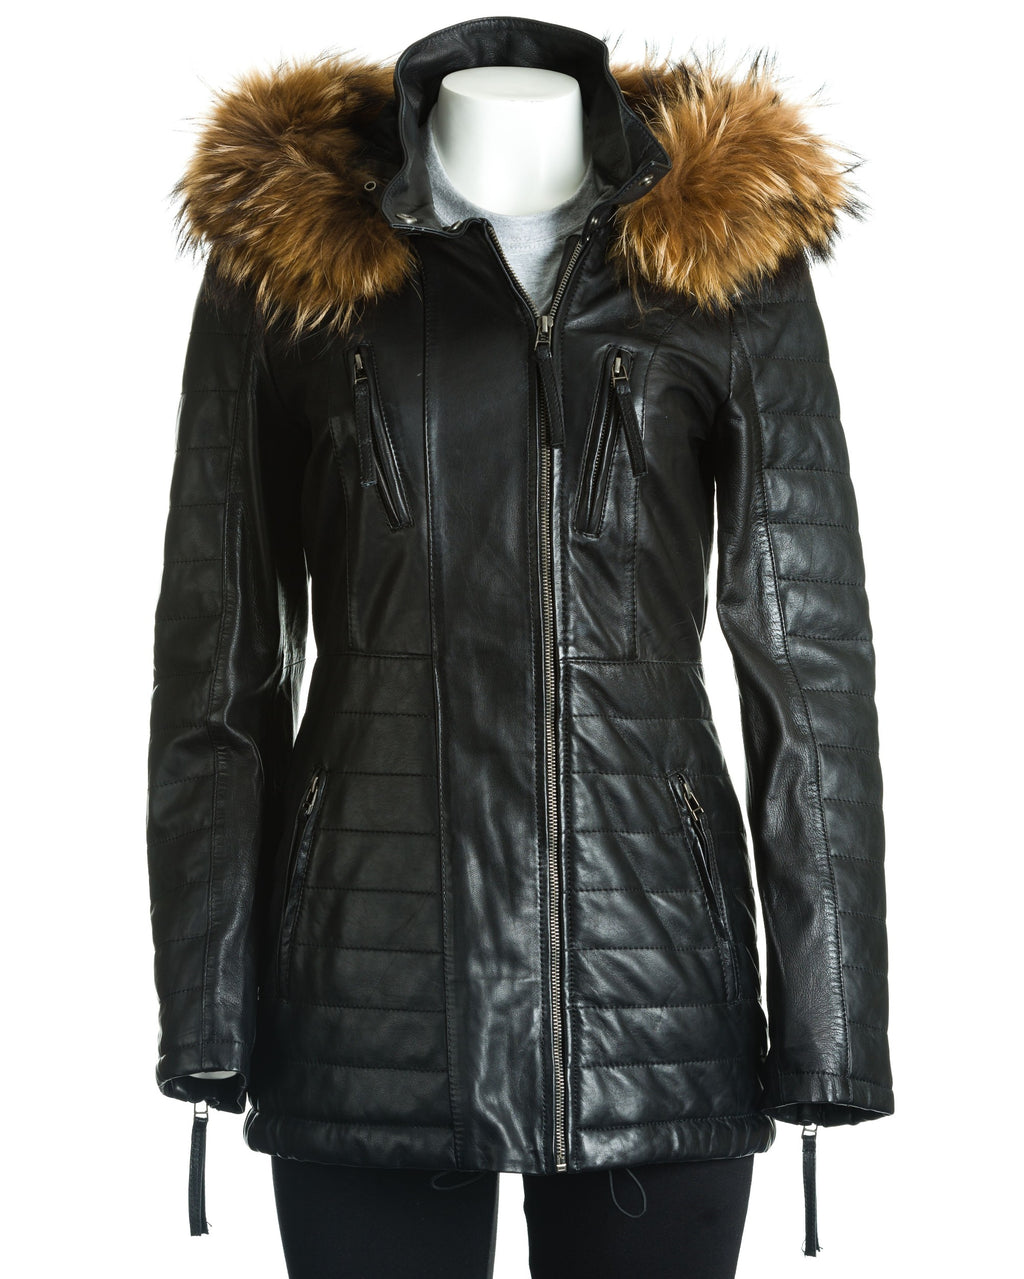 Women's Leather Parka Jacket with Stitch Detail: Pippa